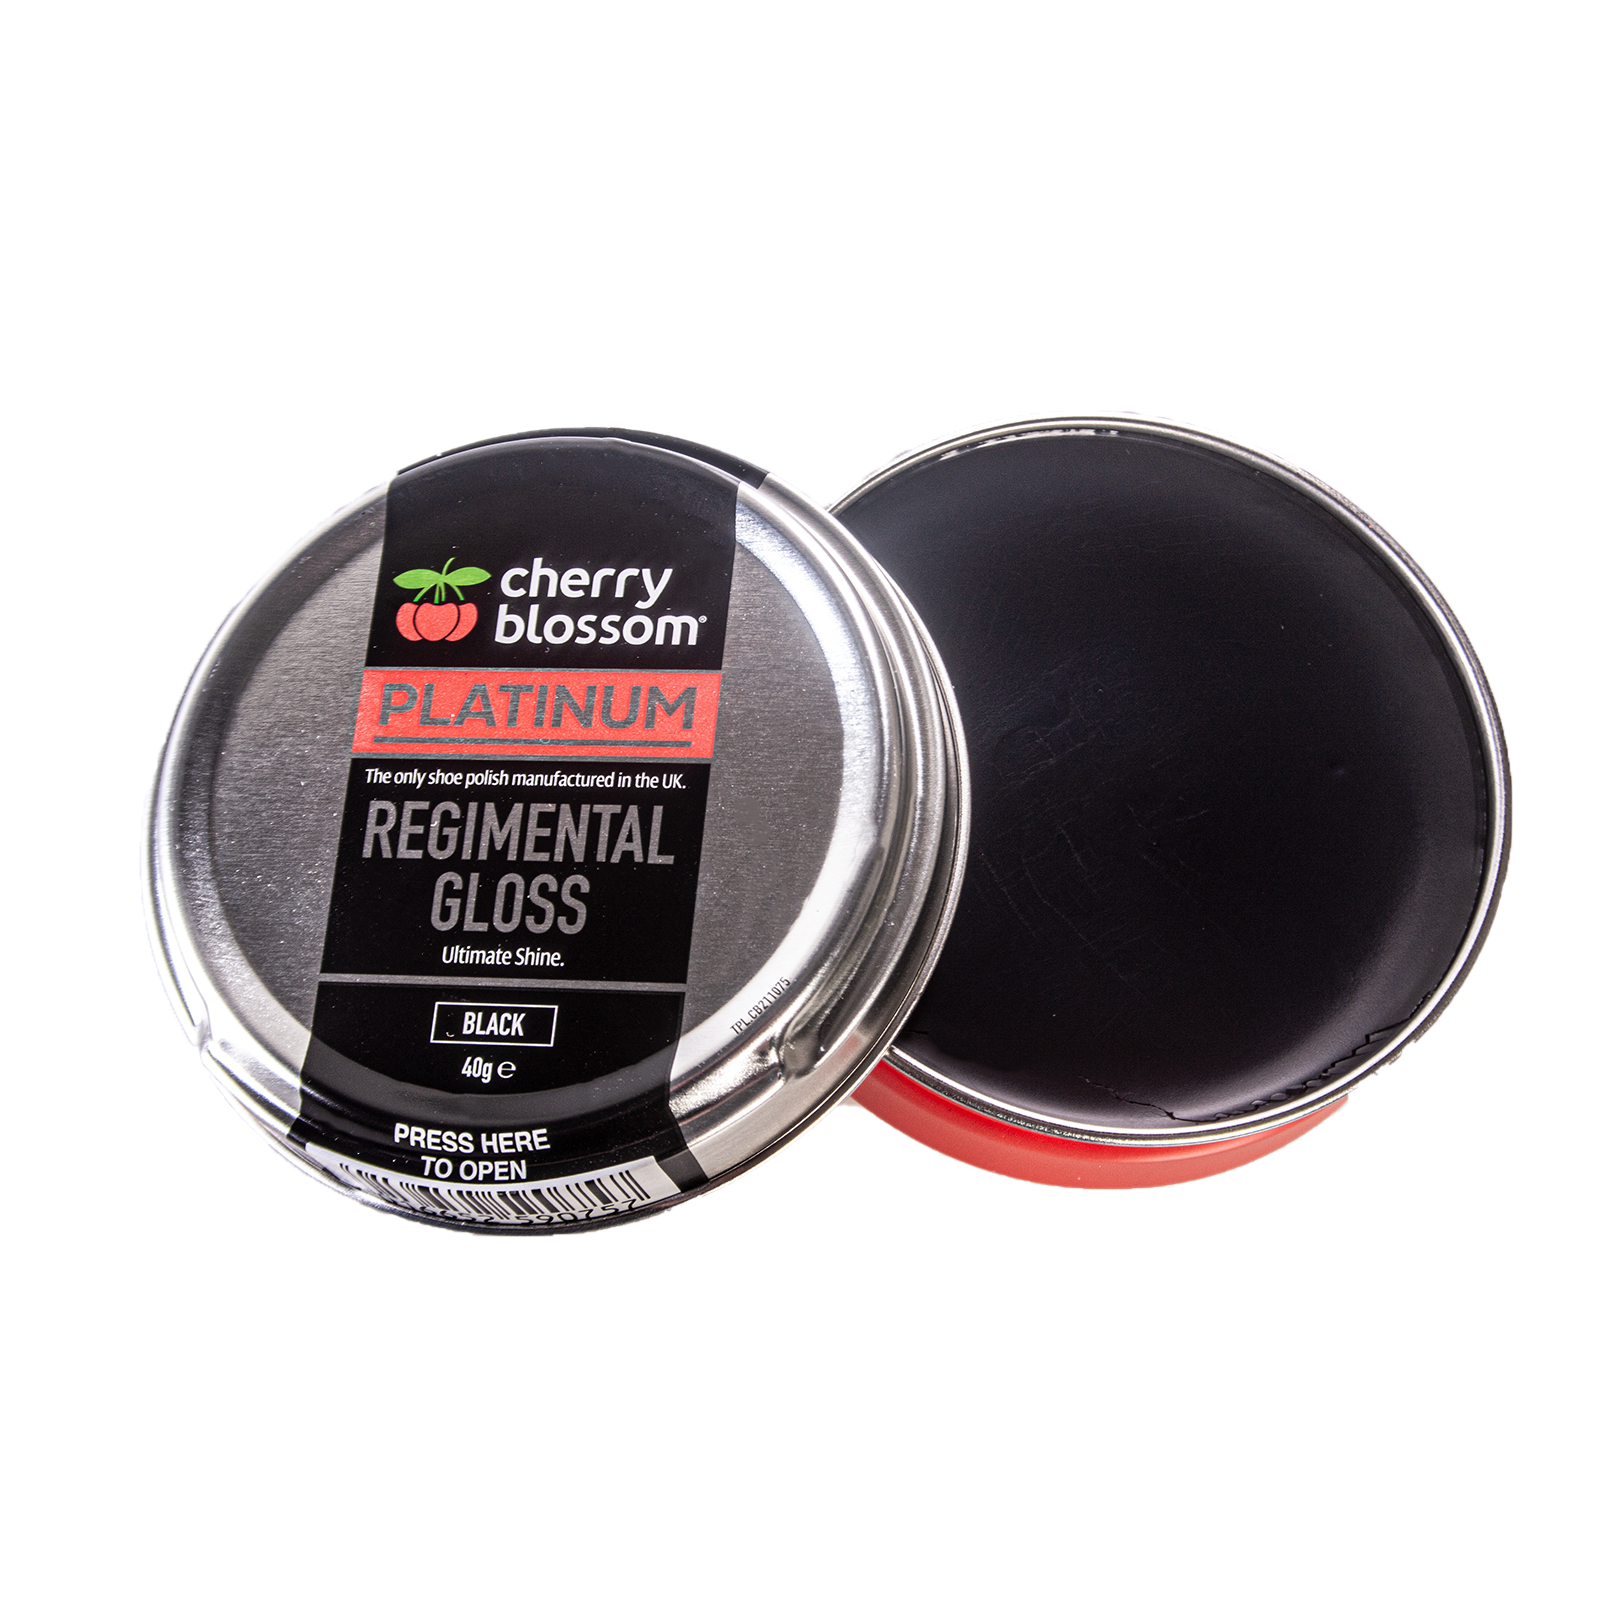 Shoe polish dubbin and regimental black and brown gloss by Cherry Blossom